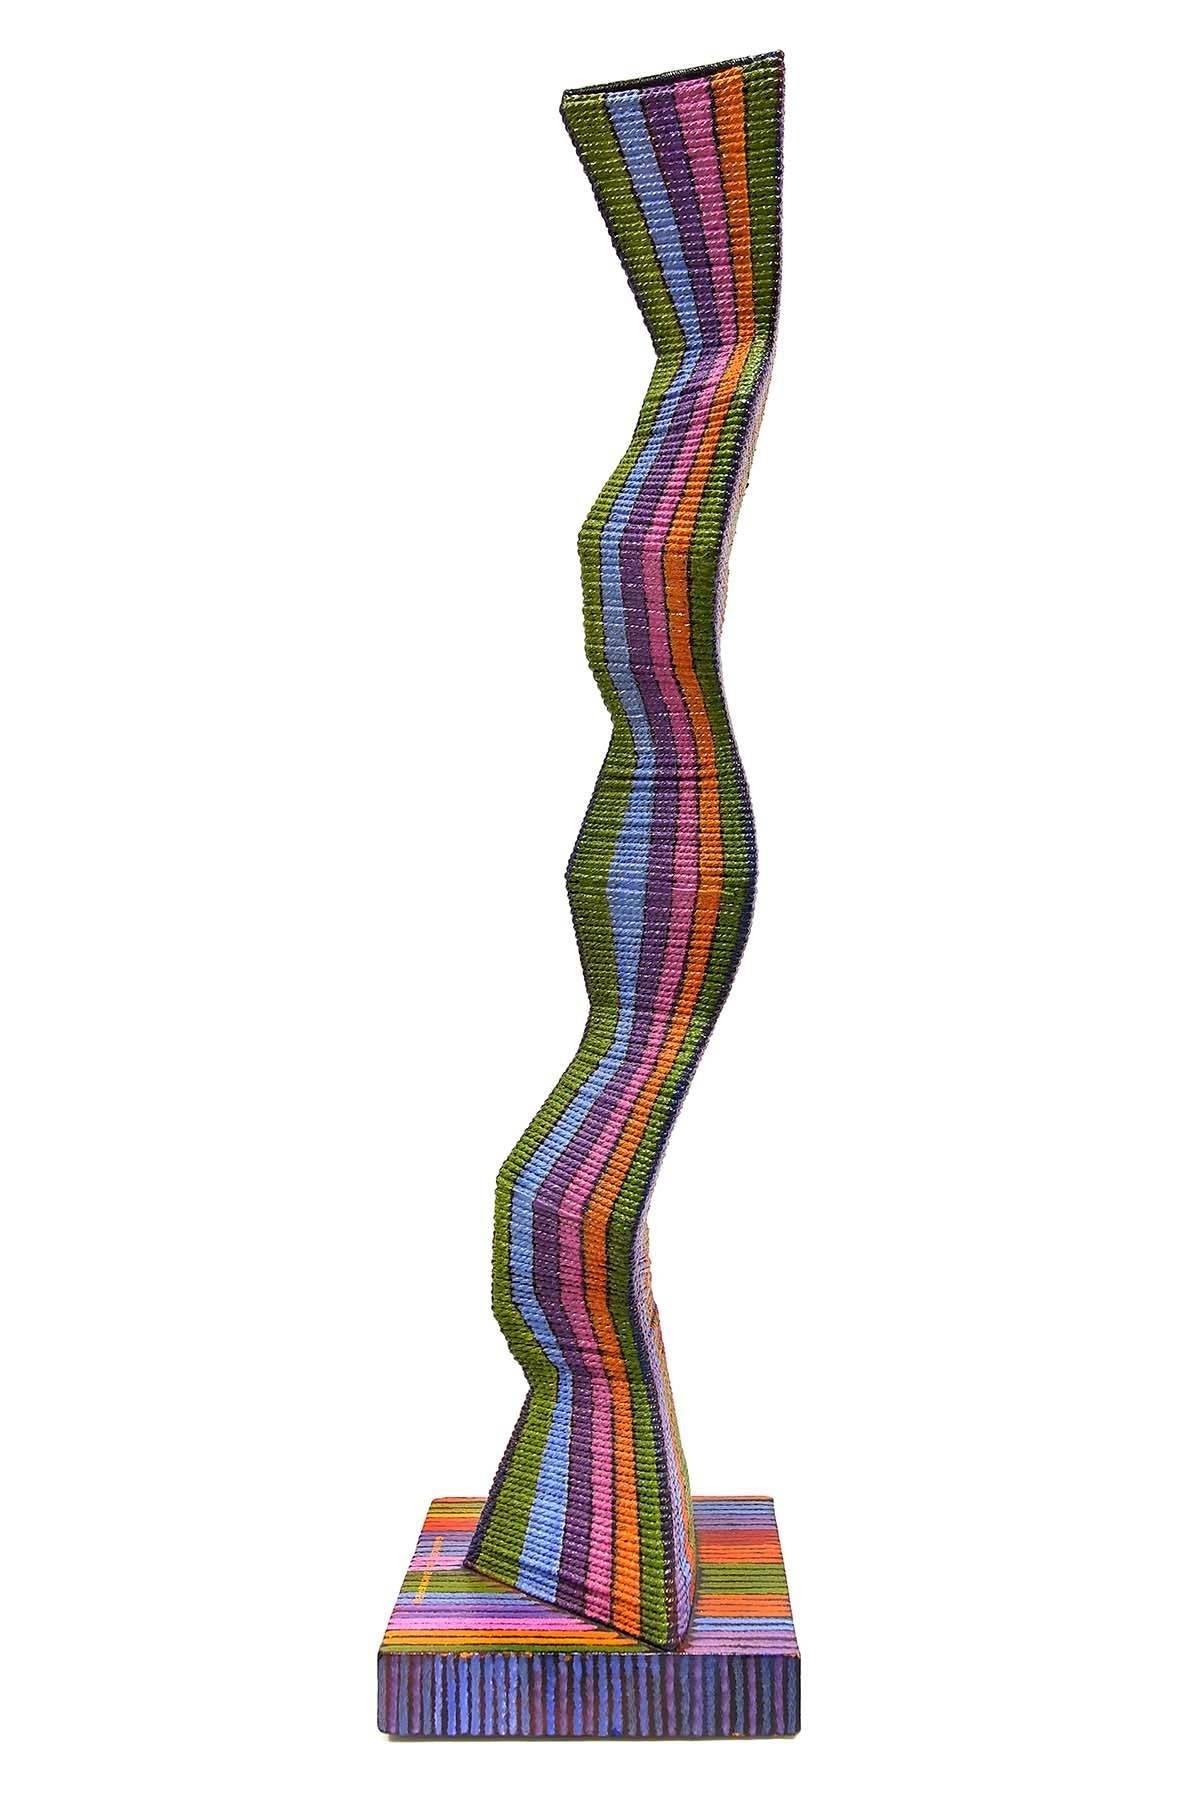 Abstract Geometric Psychedelic Colorfull Volume Twine Sculpture - Brown Abstract Sculpture by George Bucher